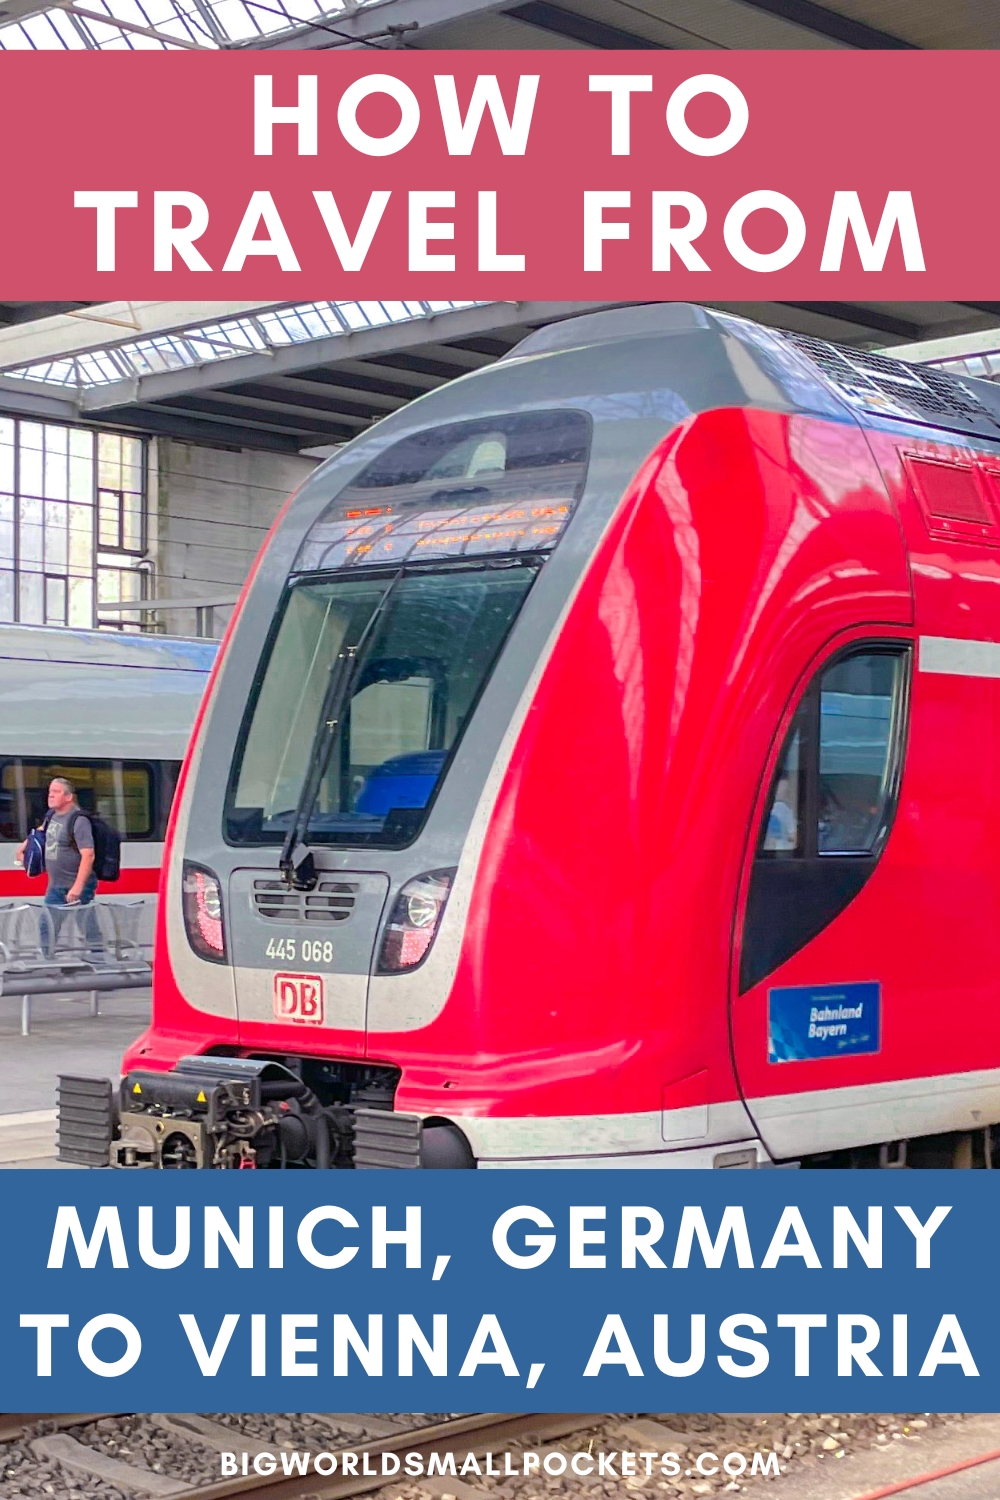 How to Travel from Munich to Vienna